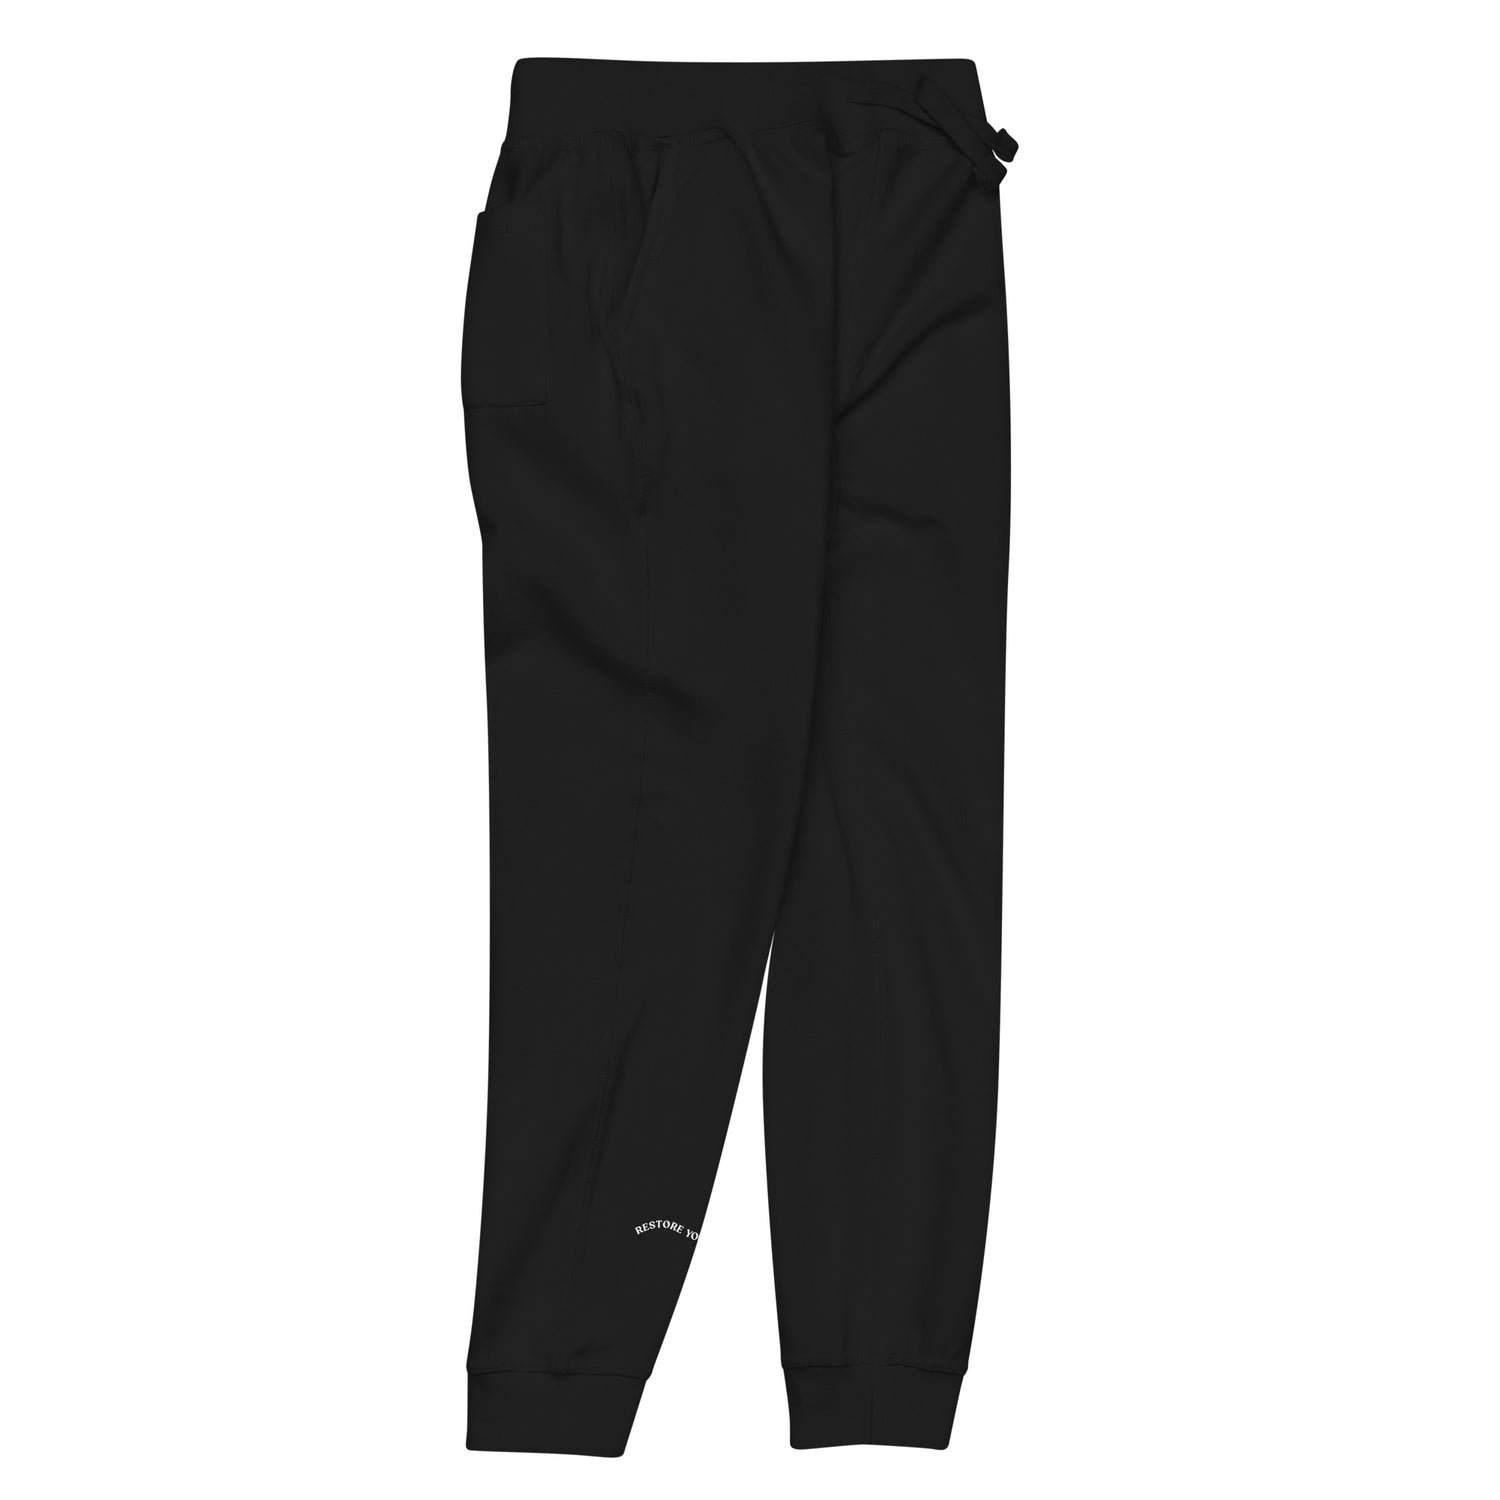 Side of full length black sweat pant with pockets on side and back, featuring "restore yourself" printed on right side lower leg.